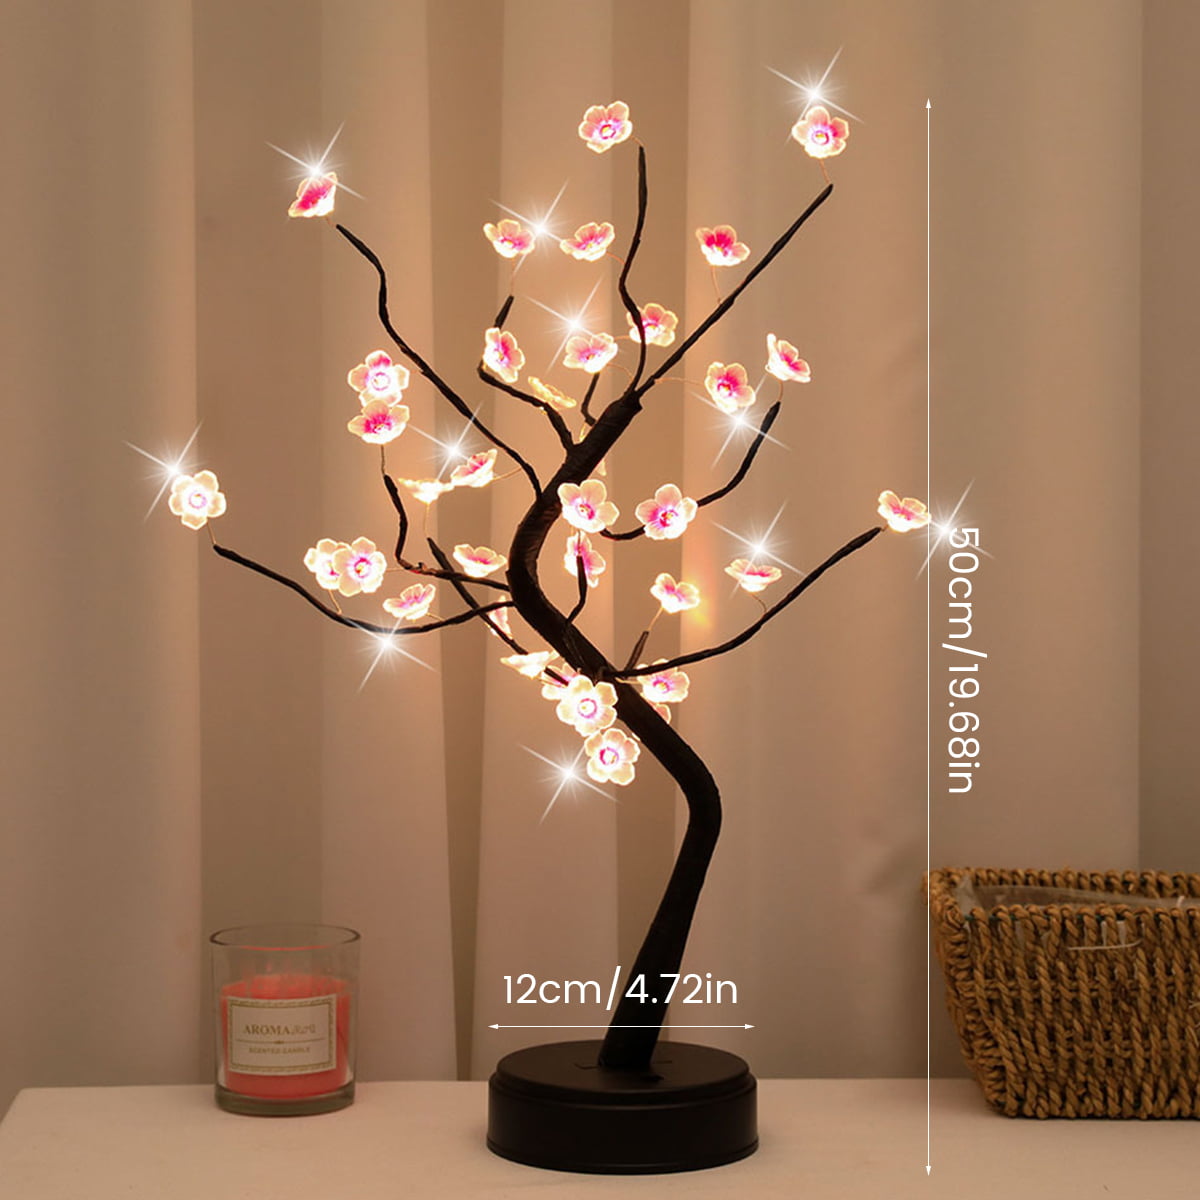 Lostars LED Bonsai Tree Light Tabletop Lighted Tree USB and Battery  Operated Adjustable Branch Light Lamp 6 Hrs Timer Decor for Bedroom Home  Wedding